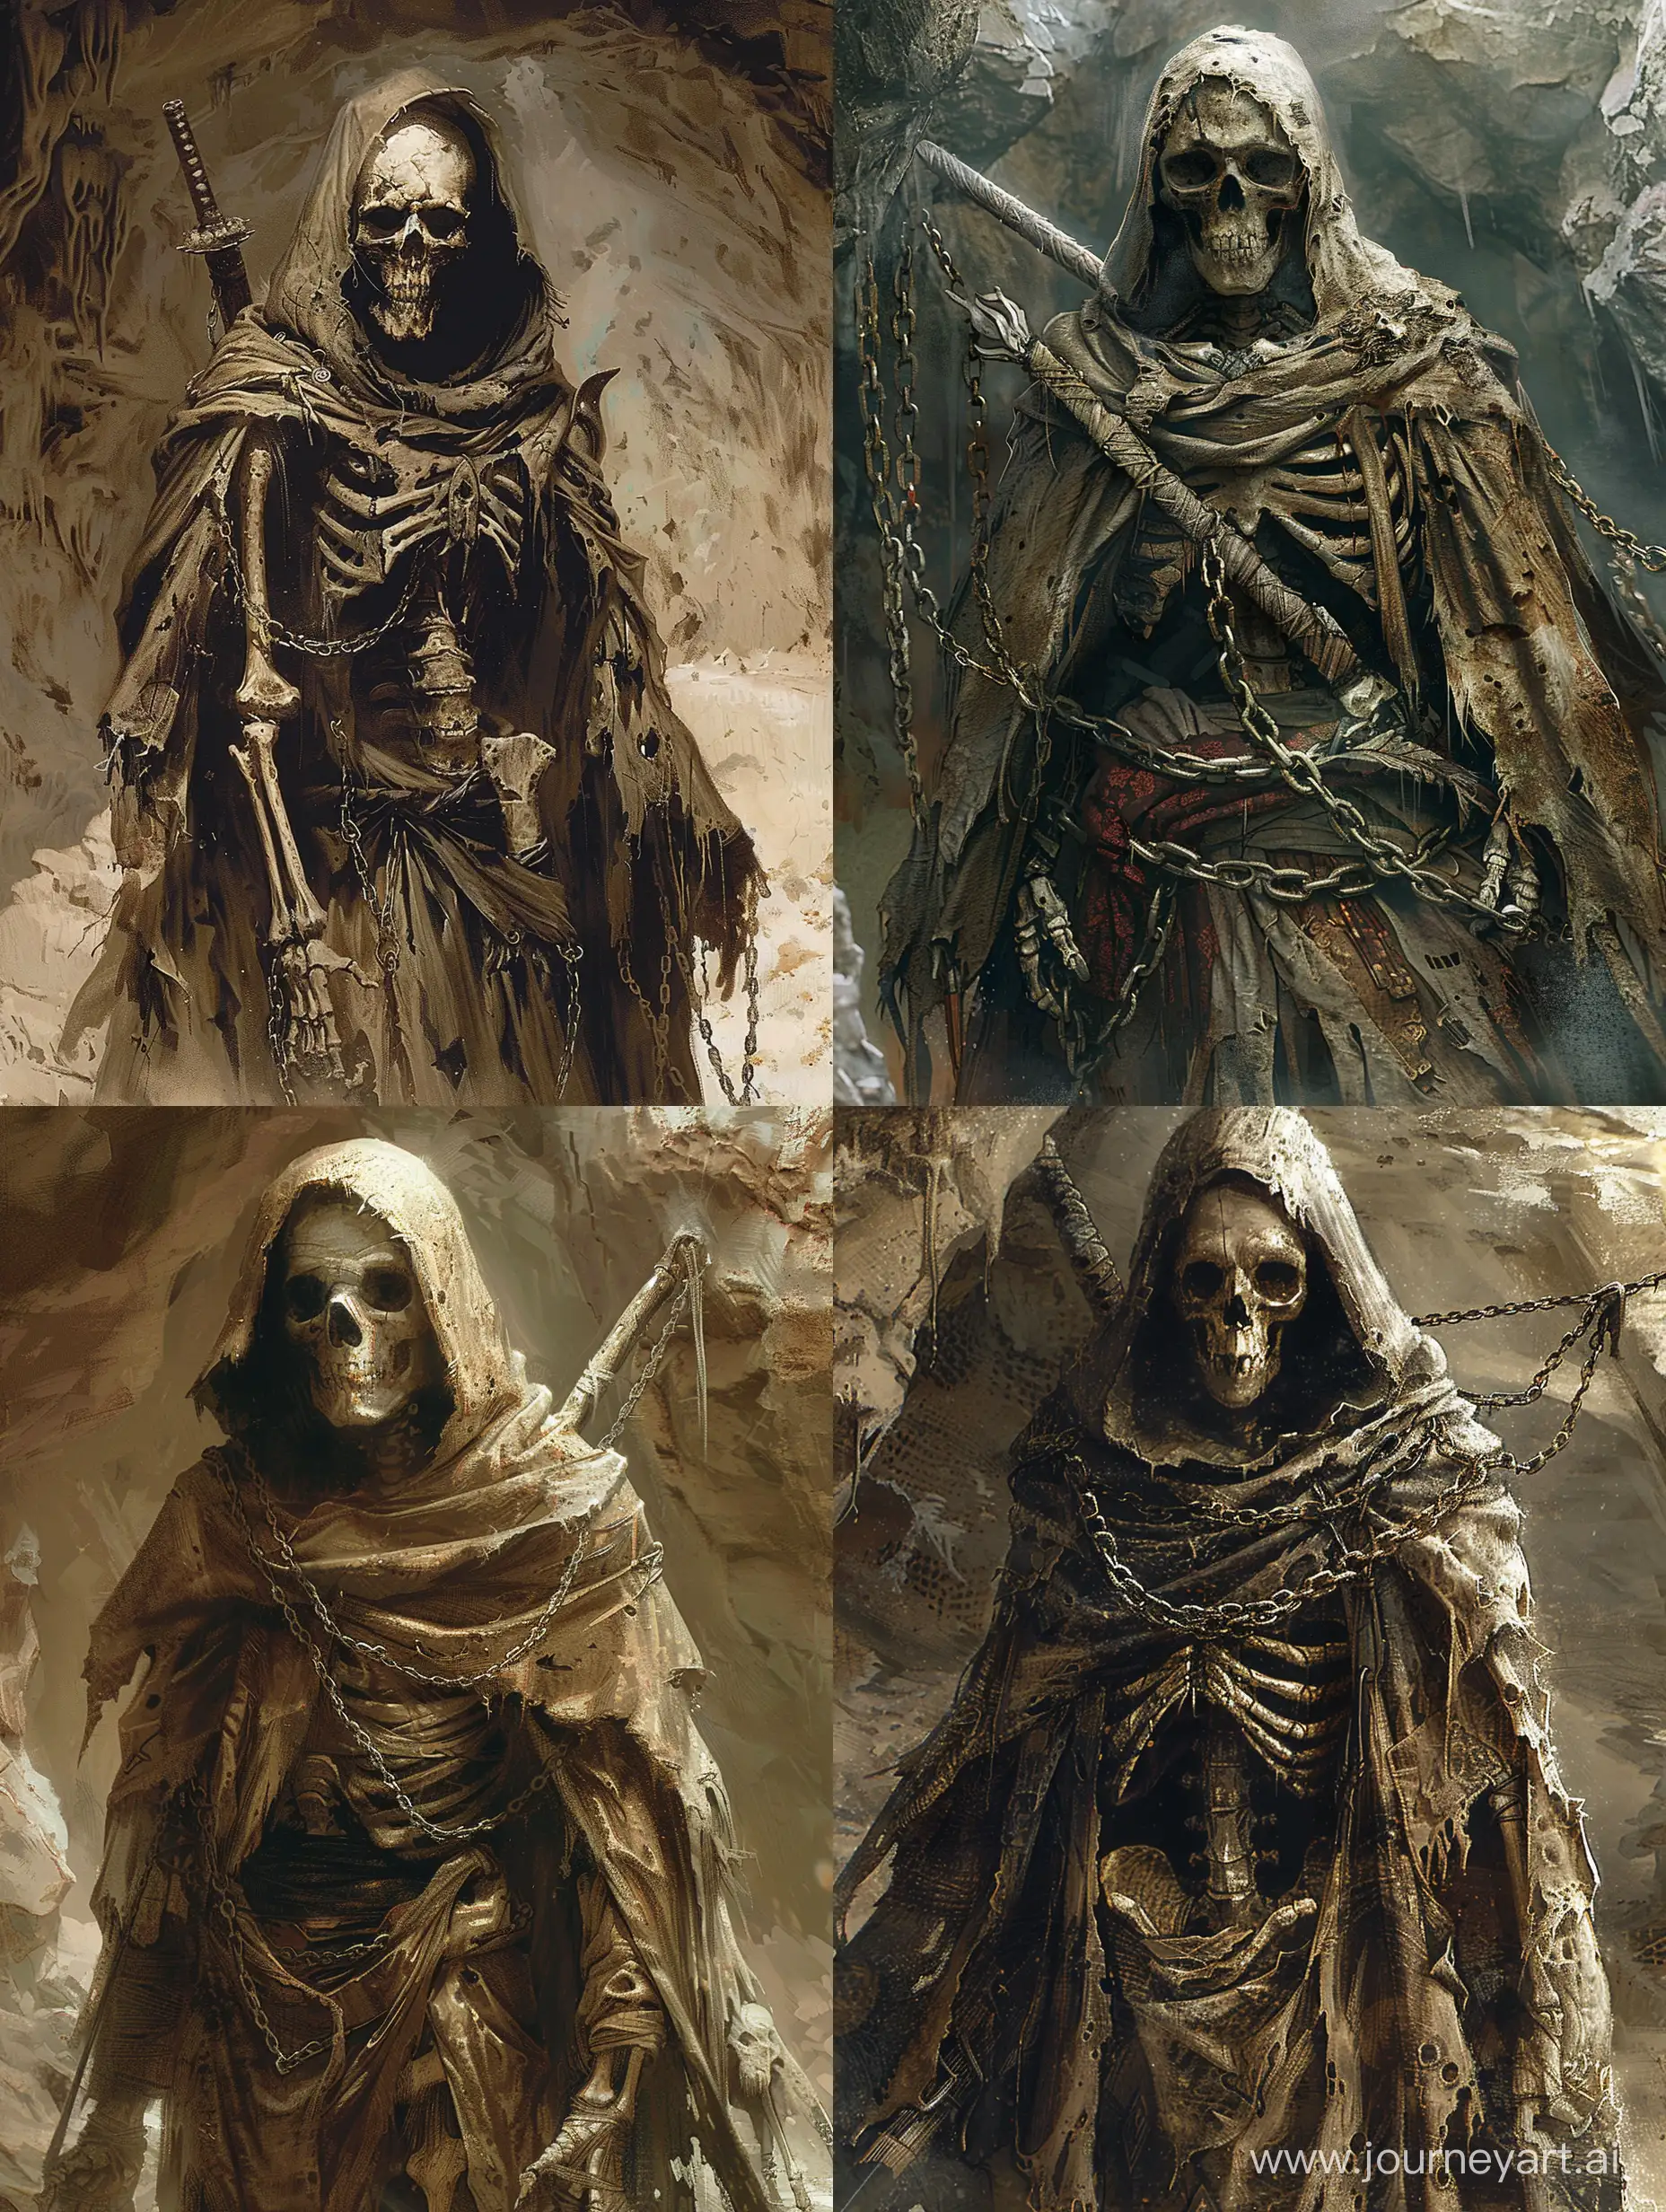 Skeleton warrior [ The central subject is a skeletal being draped in tattered robes and armor. The figure wears a hooded cloak, obscuring most of its skull-like face. Only the empty eye sockets and an open mouth are visible. The robes are worn and torn, suggesting age or neglect. Chains are wrapped around its body, adding to the eerie ambiance. The background is rendered in muted tones, enhancing the overall sense of foreboding. The figure stands against this backdrop, exuding an aura of ancient malevolence]with robe and hood,naginata on the back , in a cave-like place underground , horror place , incredible detail,terrifying,realistic.